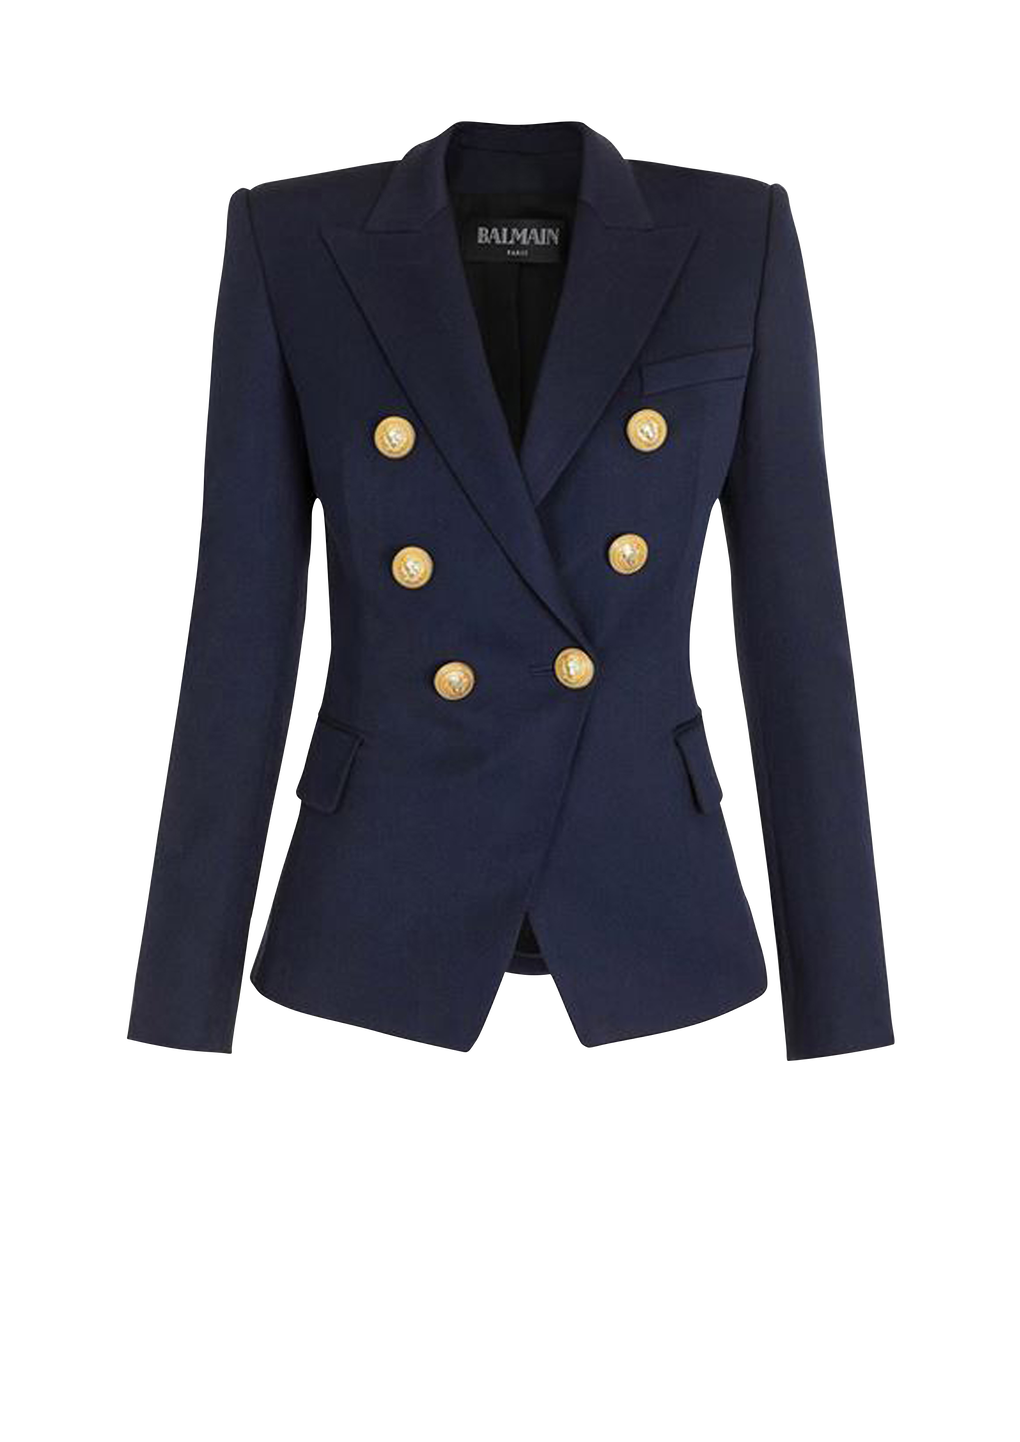 Wool double-breasted jacket, navy, hi-res